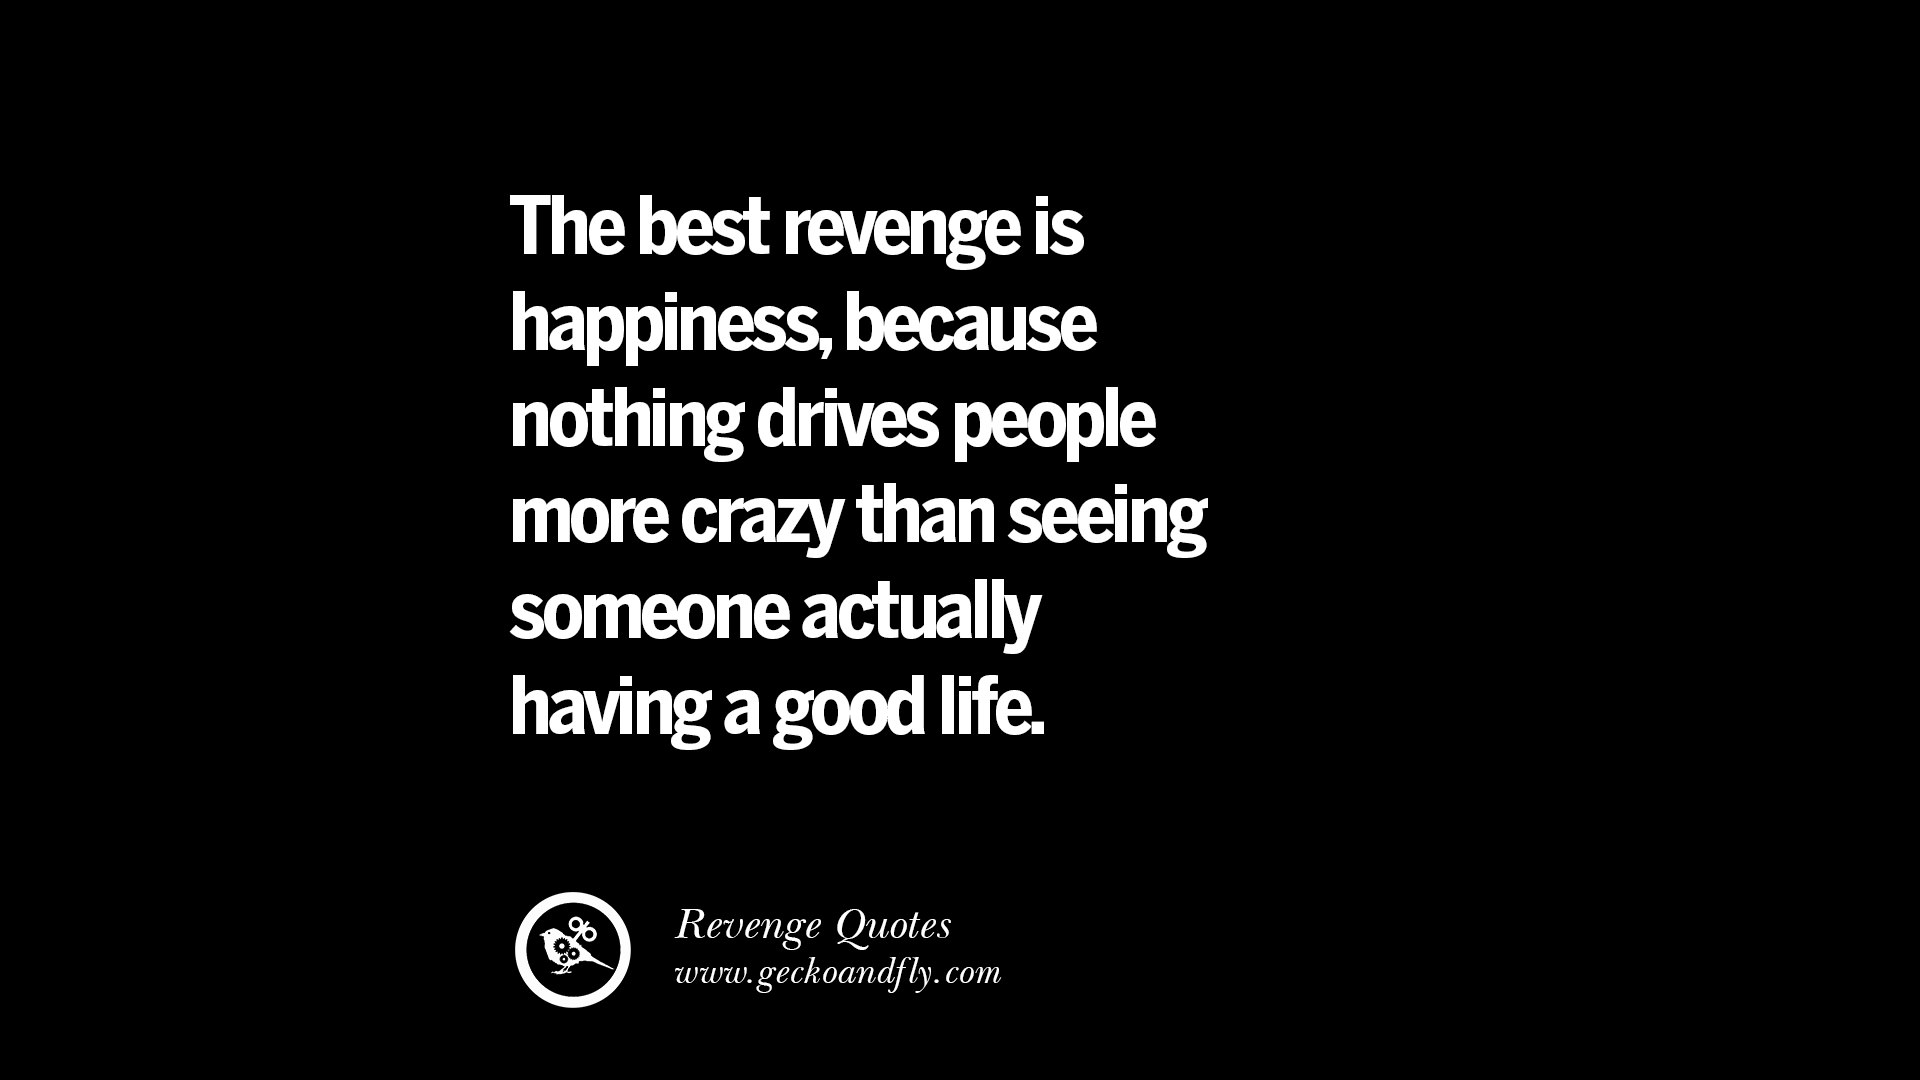 The best revenge is happiness, because nothing drives people more crazy than seeing someone actually haaving a good life.